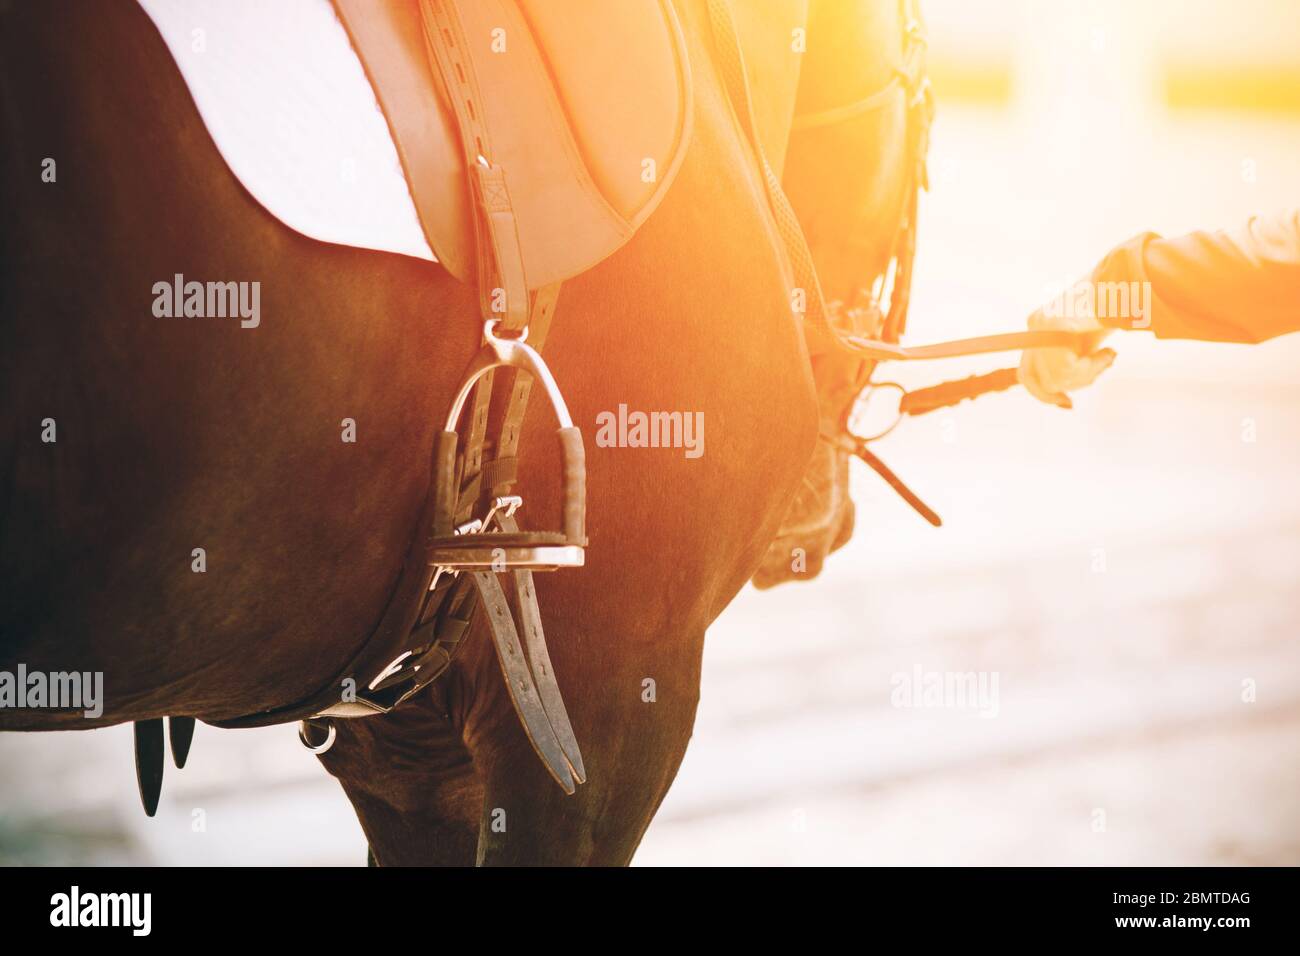 A human holds the reins of a racehorse Bay horse dressed in sports equipment and illuminated by bright sunlight. Stock Photo